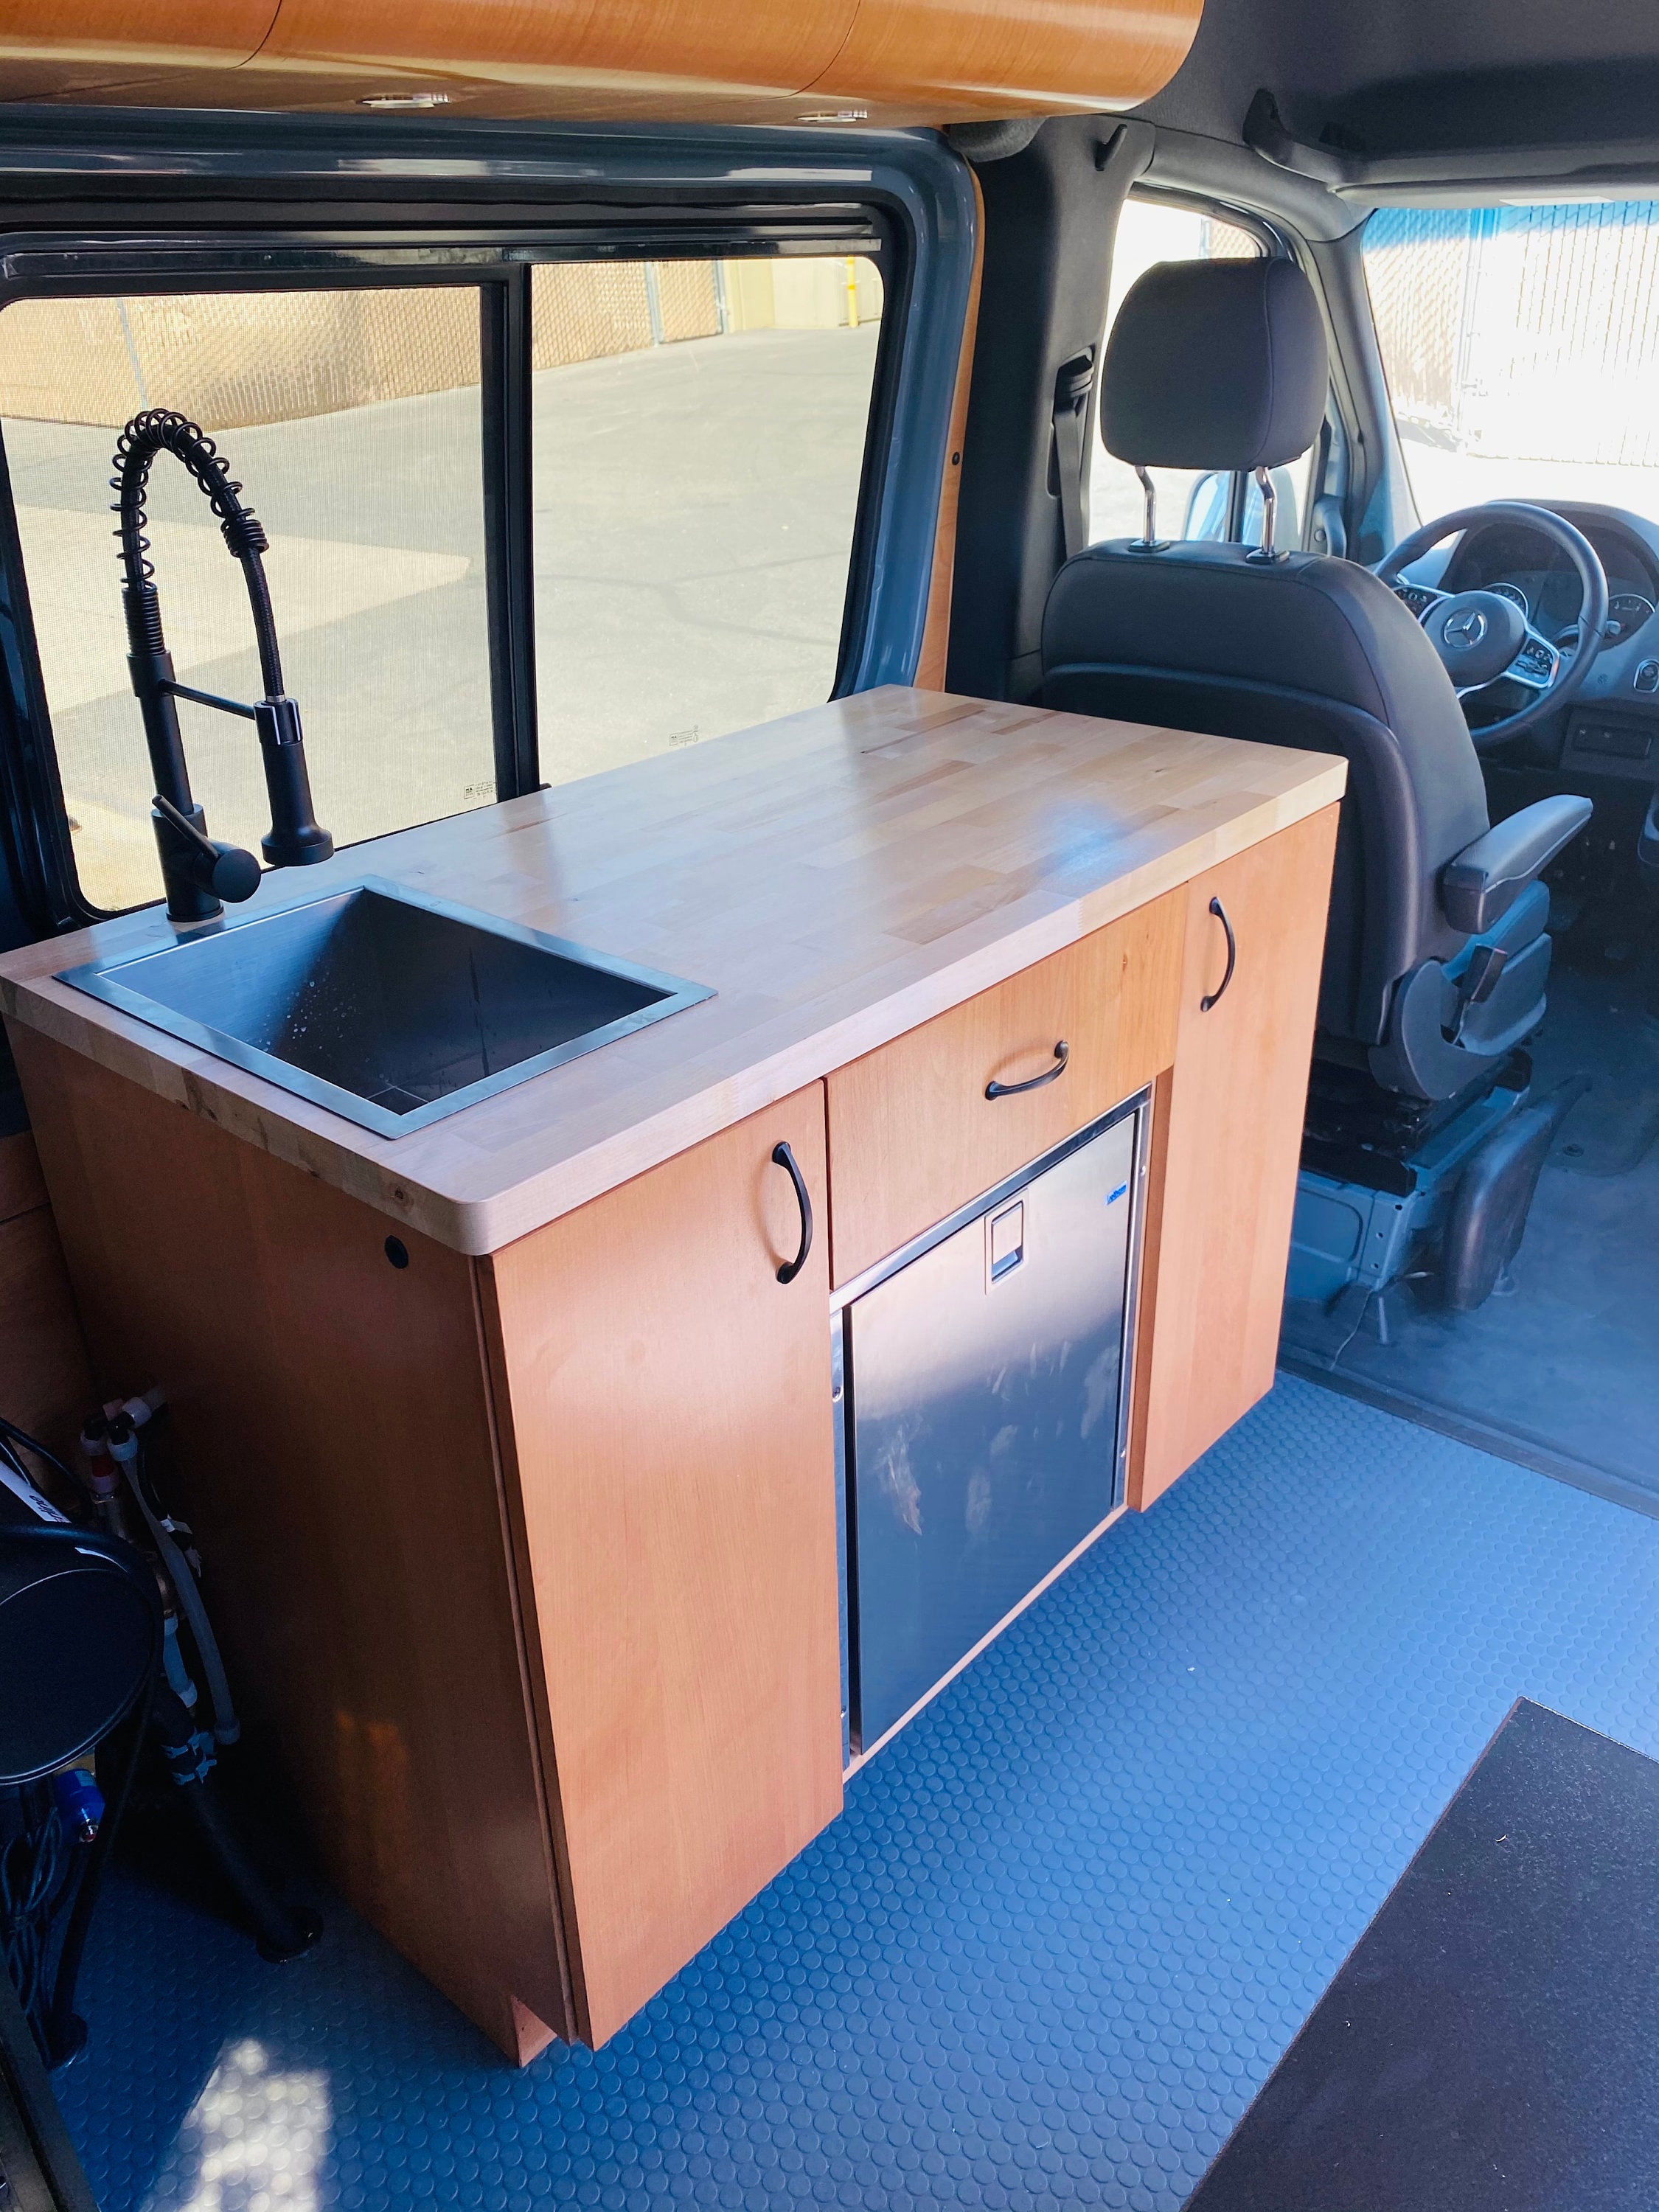 Van Cabinet Galley For Sprinter Ram Promaster Or Ford Transit Conversion